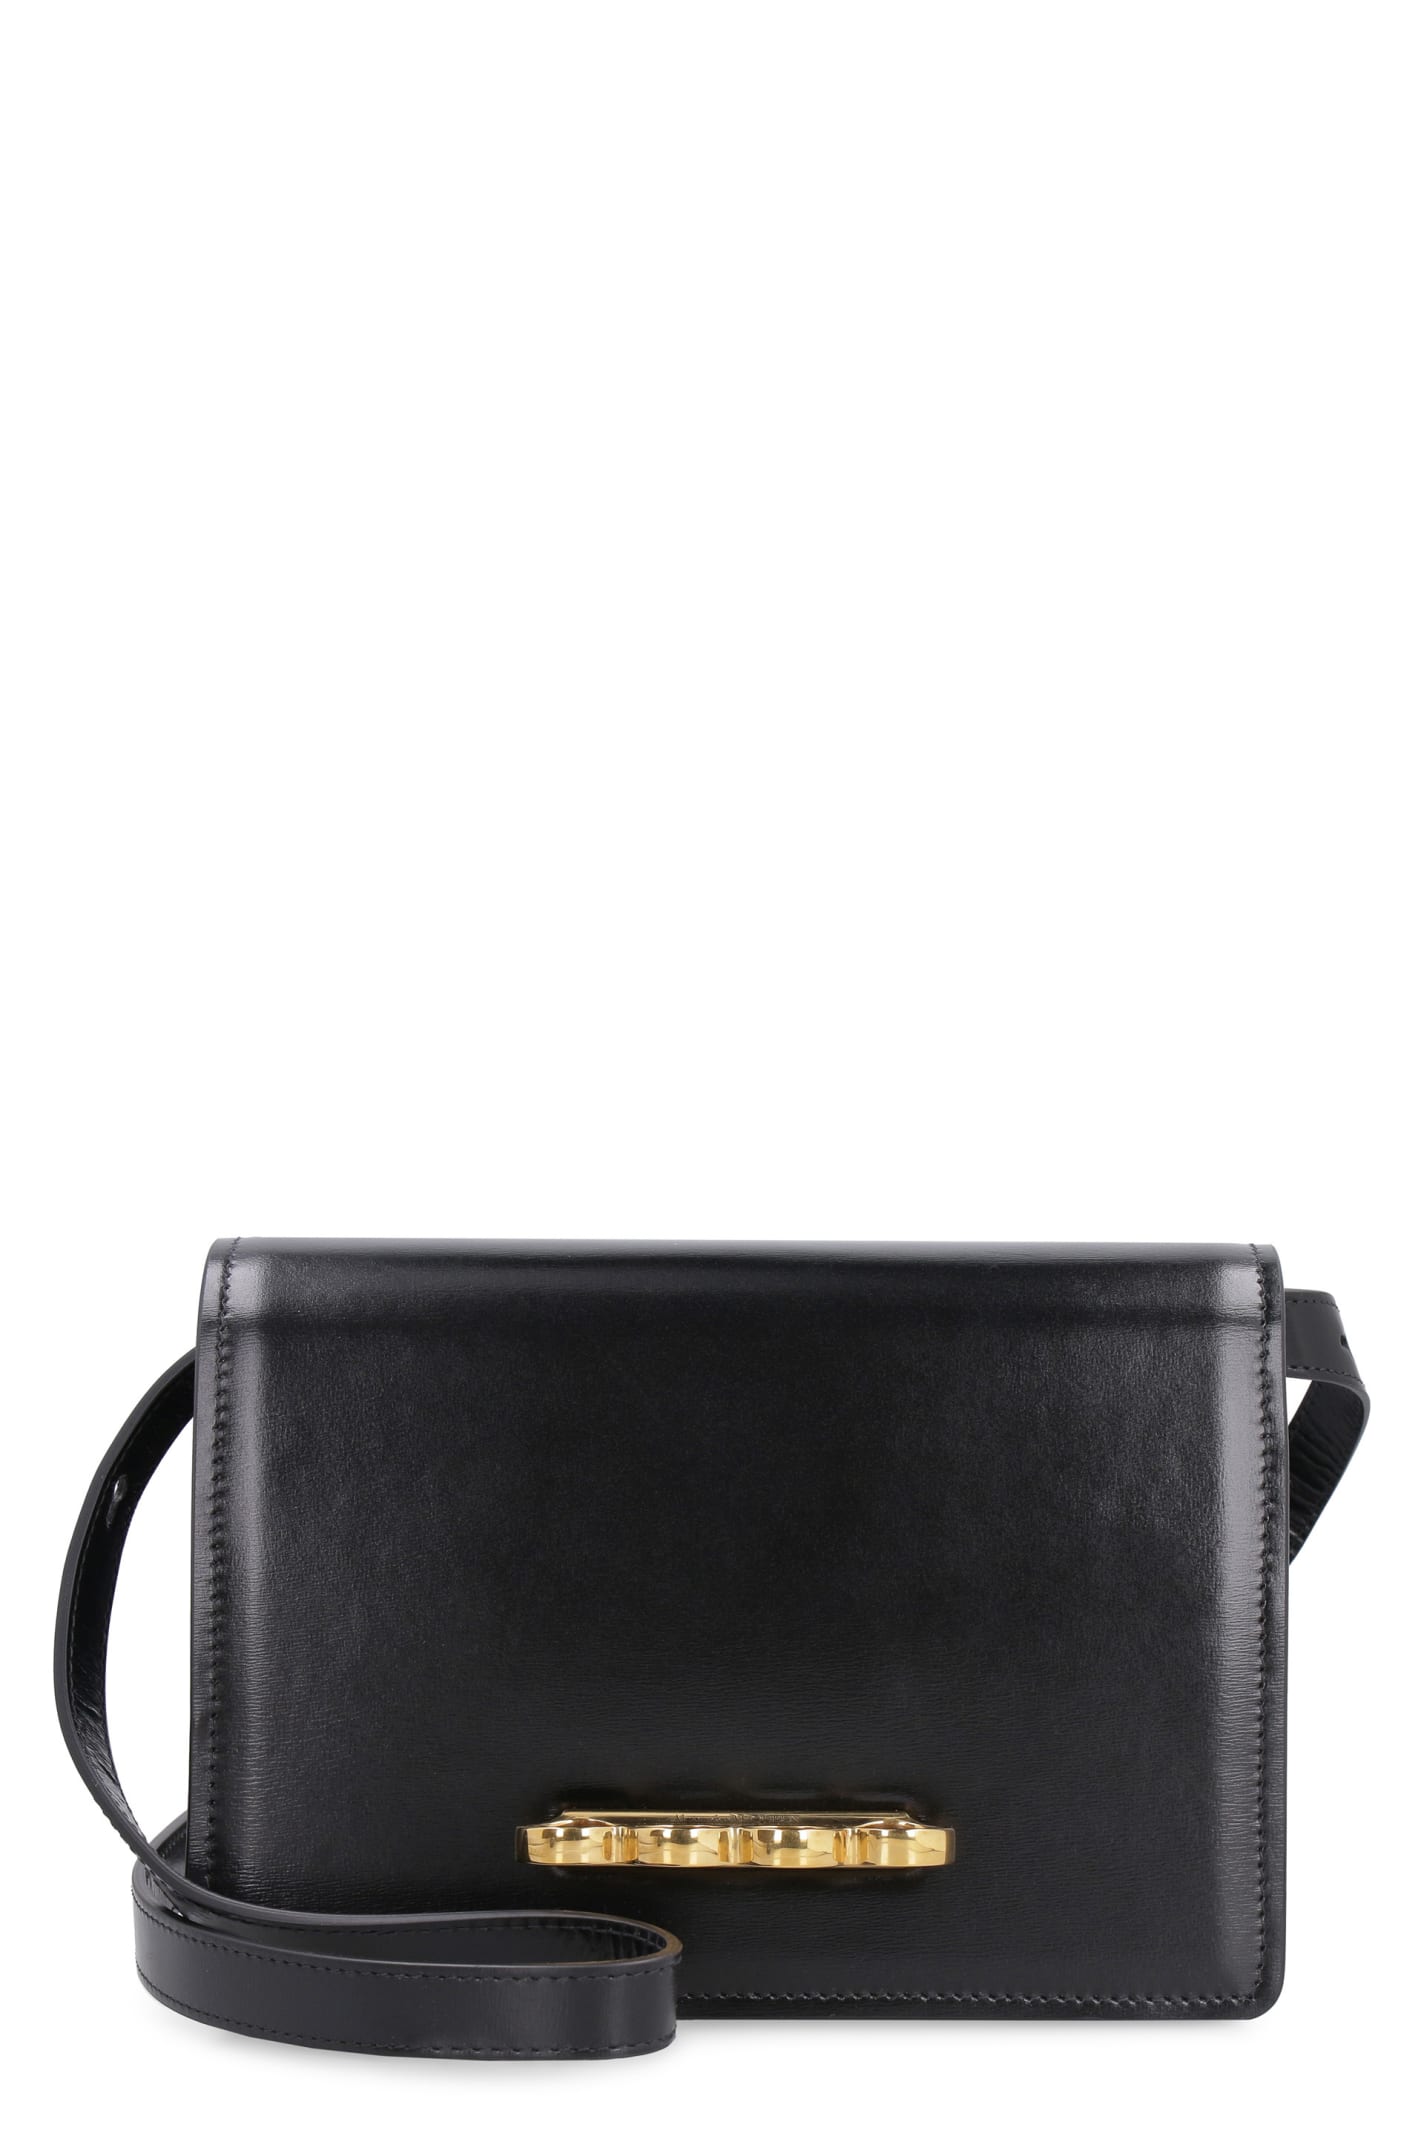 Alexander McQueen The Four Ring Leather Crossbody Bag